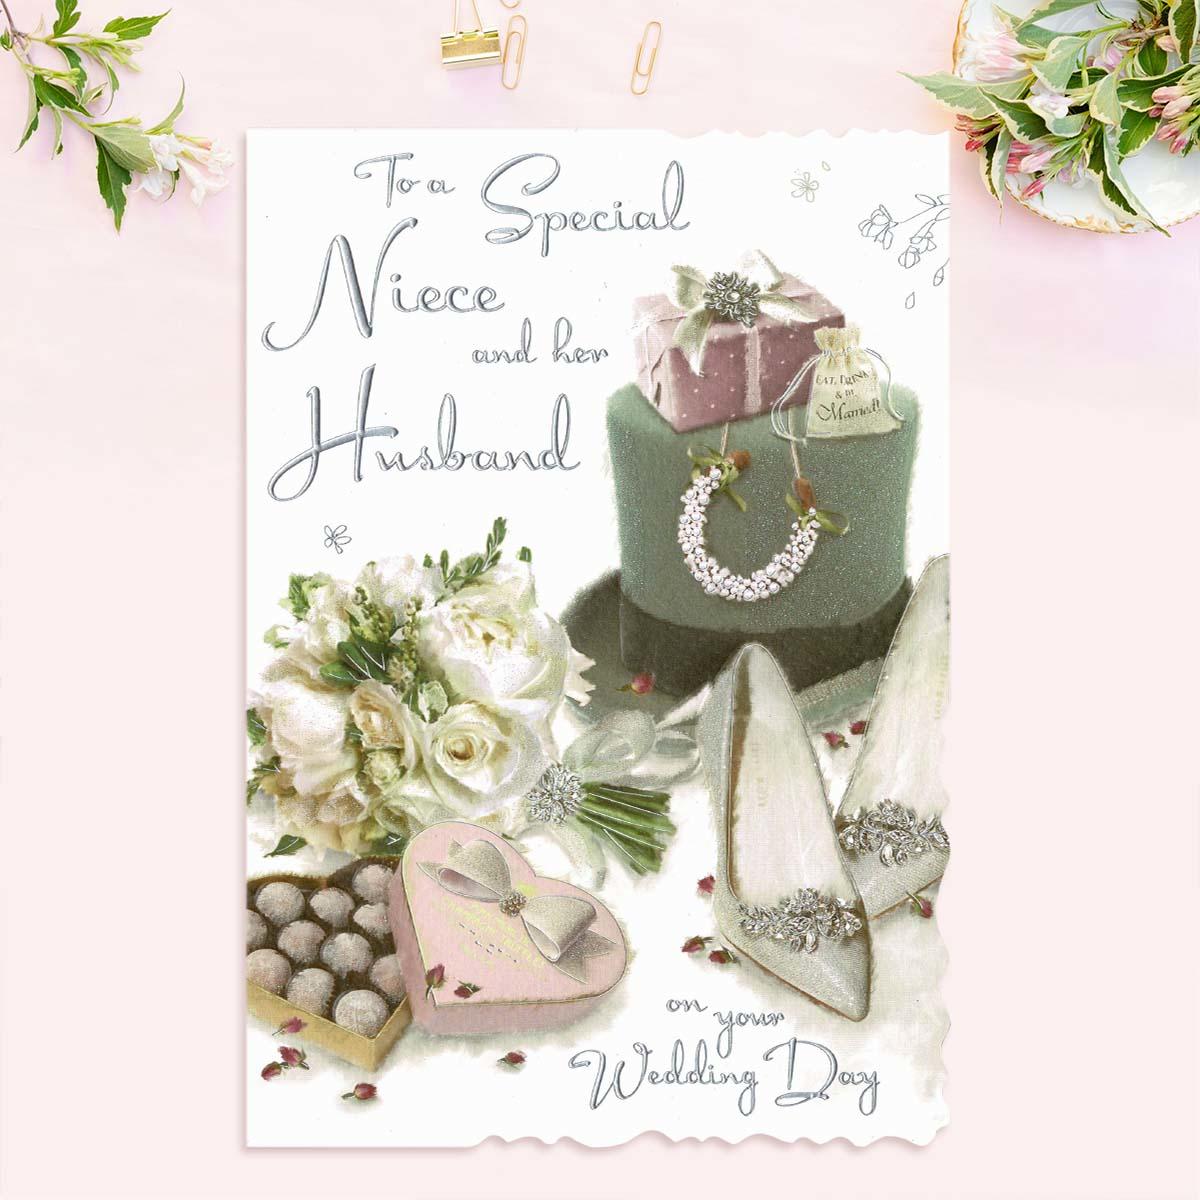 Special Niece And Her Husband Wedding Day Card Front Image